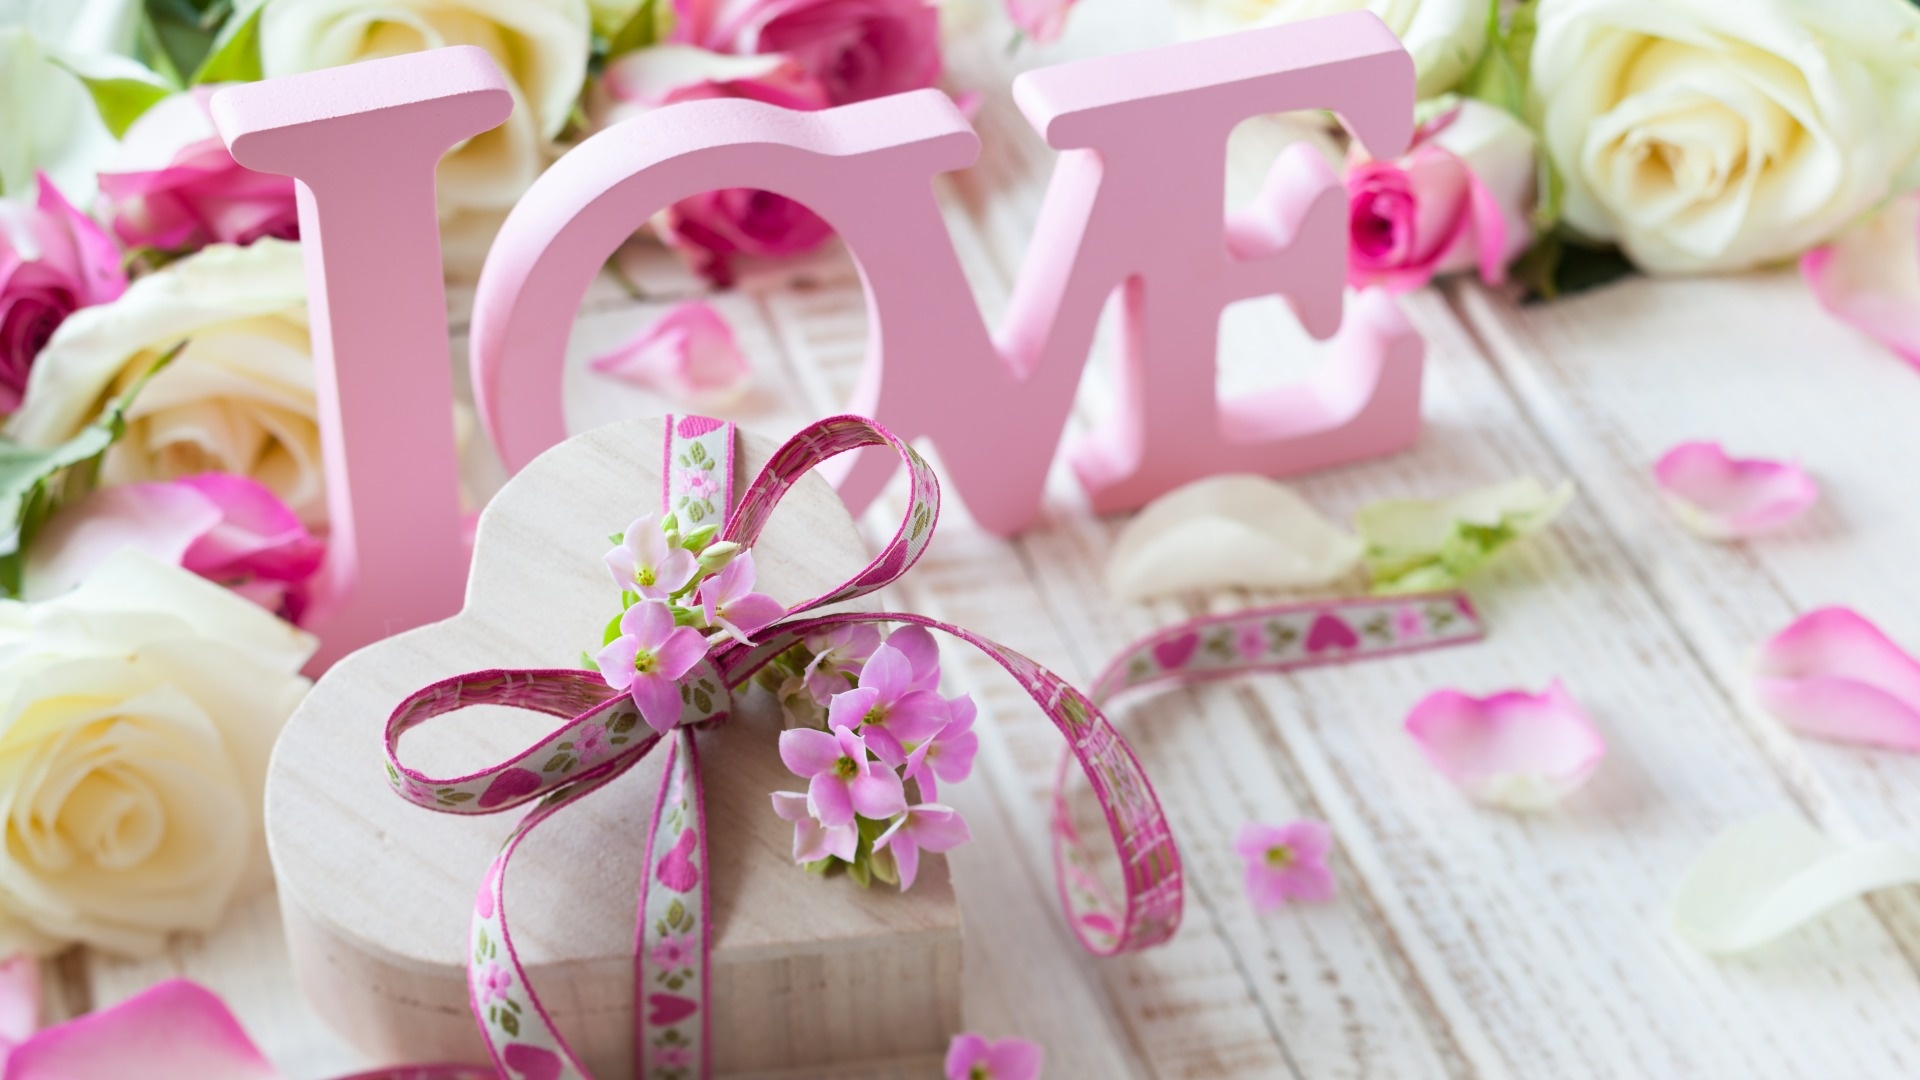 Hearts motifs, Love and romance, Valentines day, Michelle Simpson's collection, 1920x1080 Full HD Desktop